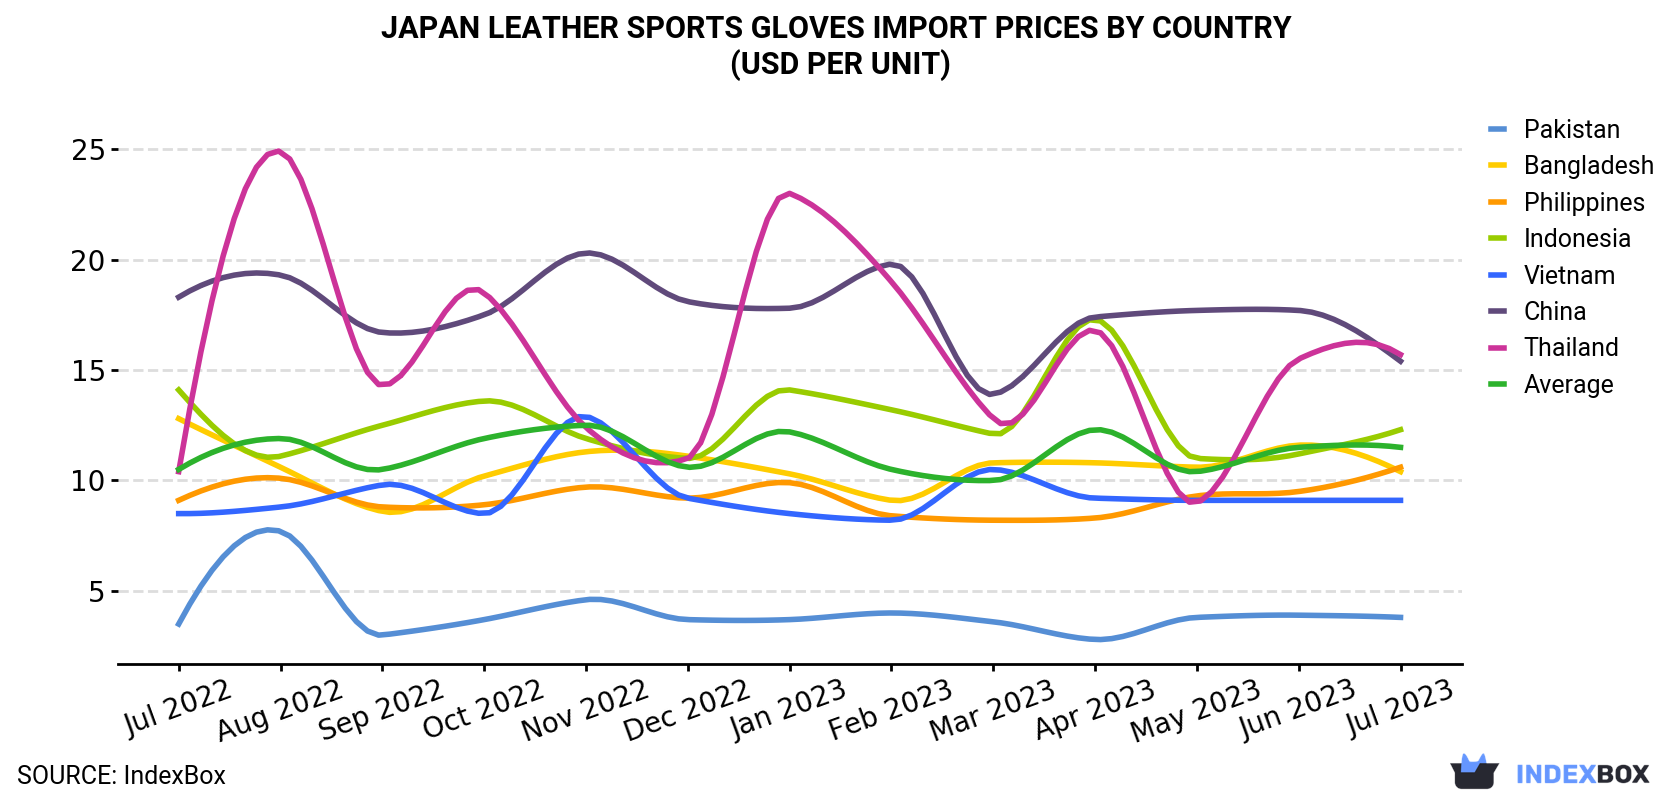 Japan Leather Sports Gloves Import Prices By Country (USD Per Unit)